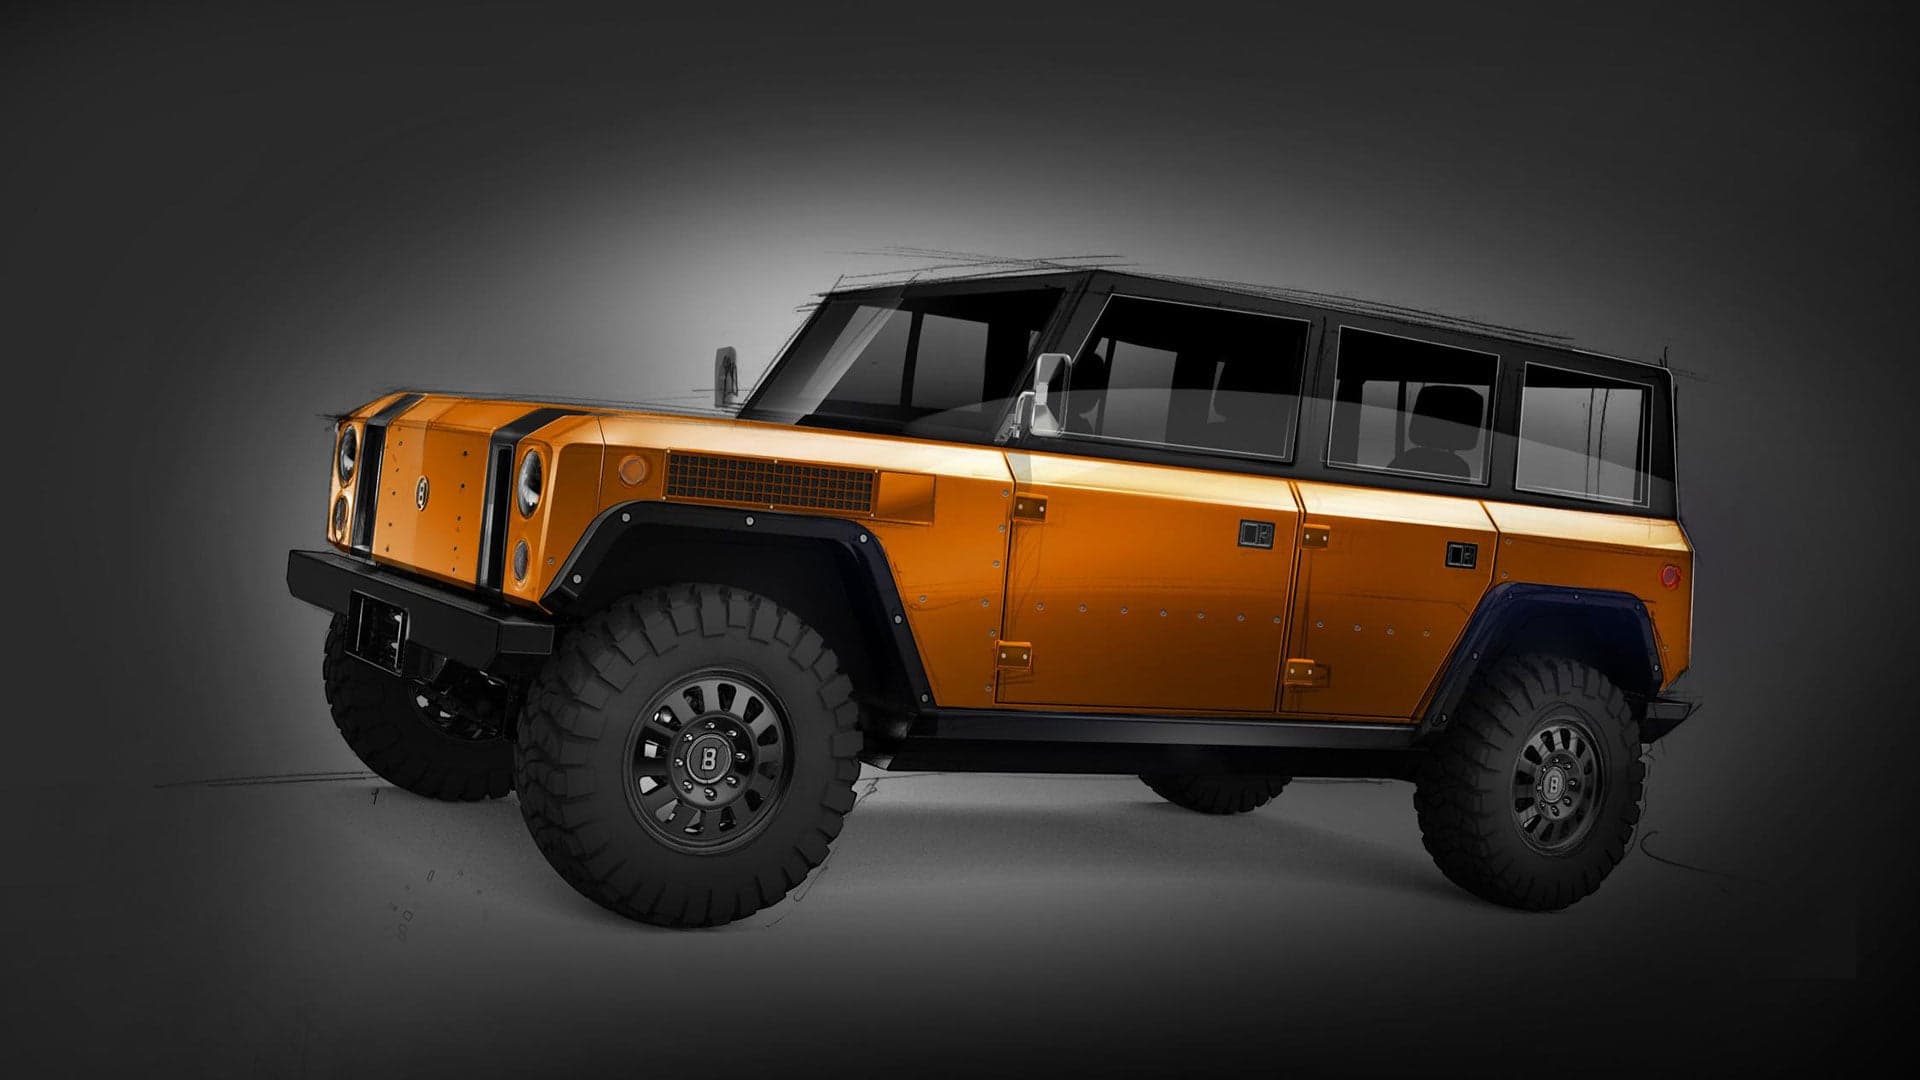 Bollinger Motors Releases First Image of Four-Door, All-Electric SUV